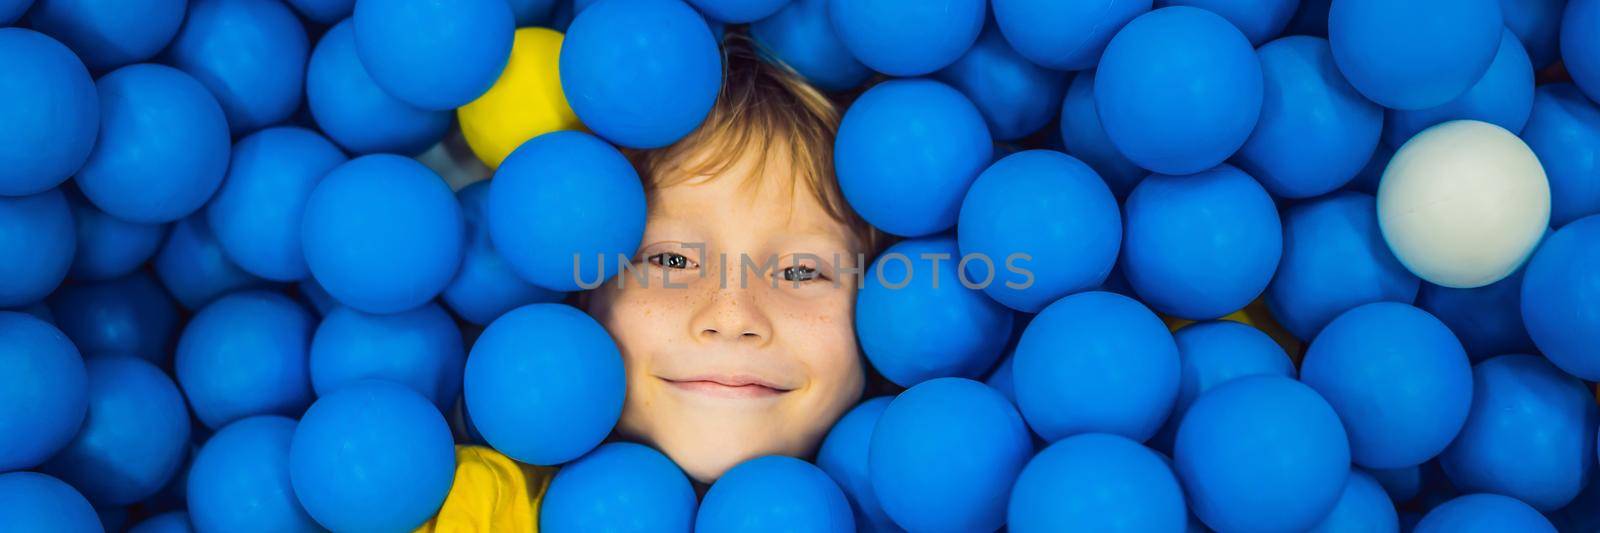 BANNER, LONG FORMAT Child playing in ball pit. Colorful toys for kids. Kindergarten or preschool play room. Toddler kid at day care indoor playground. Balls pool for children. Birthday party for active preschooler.